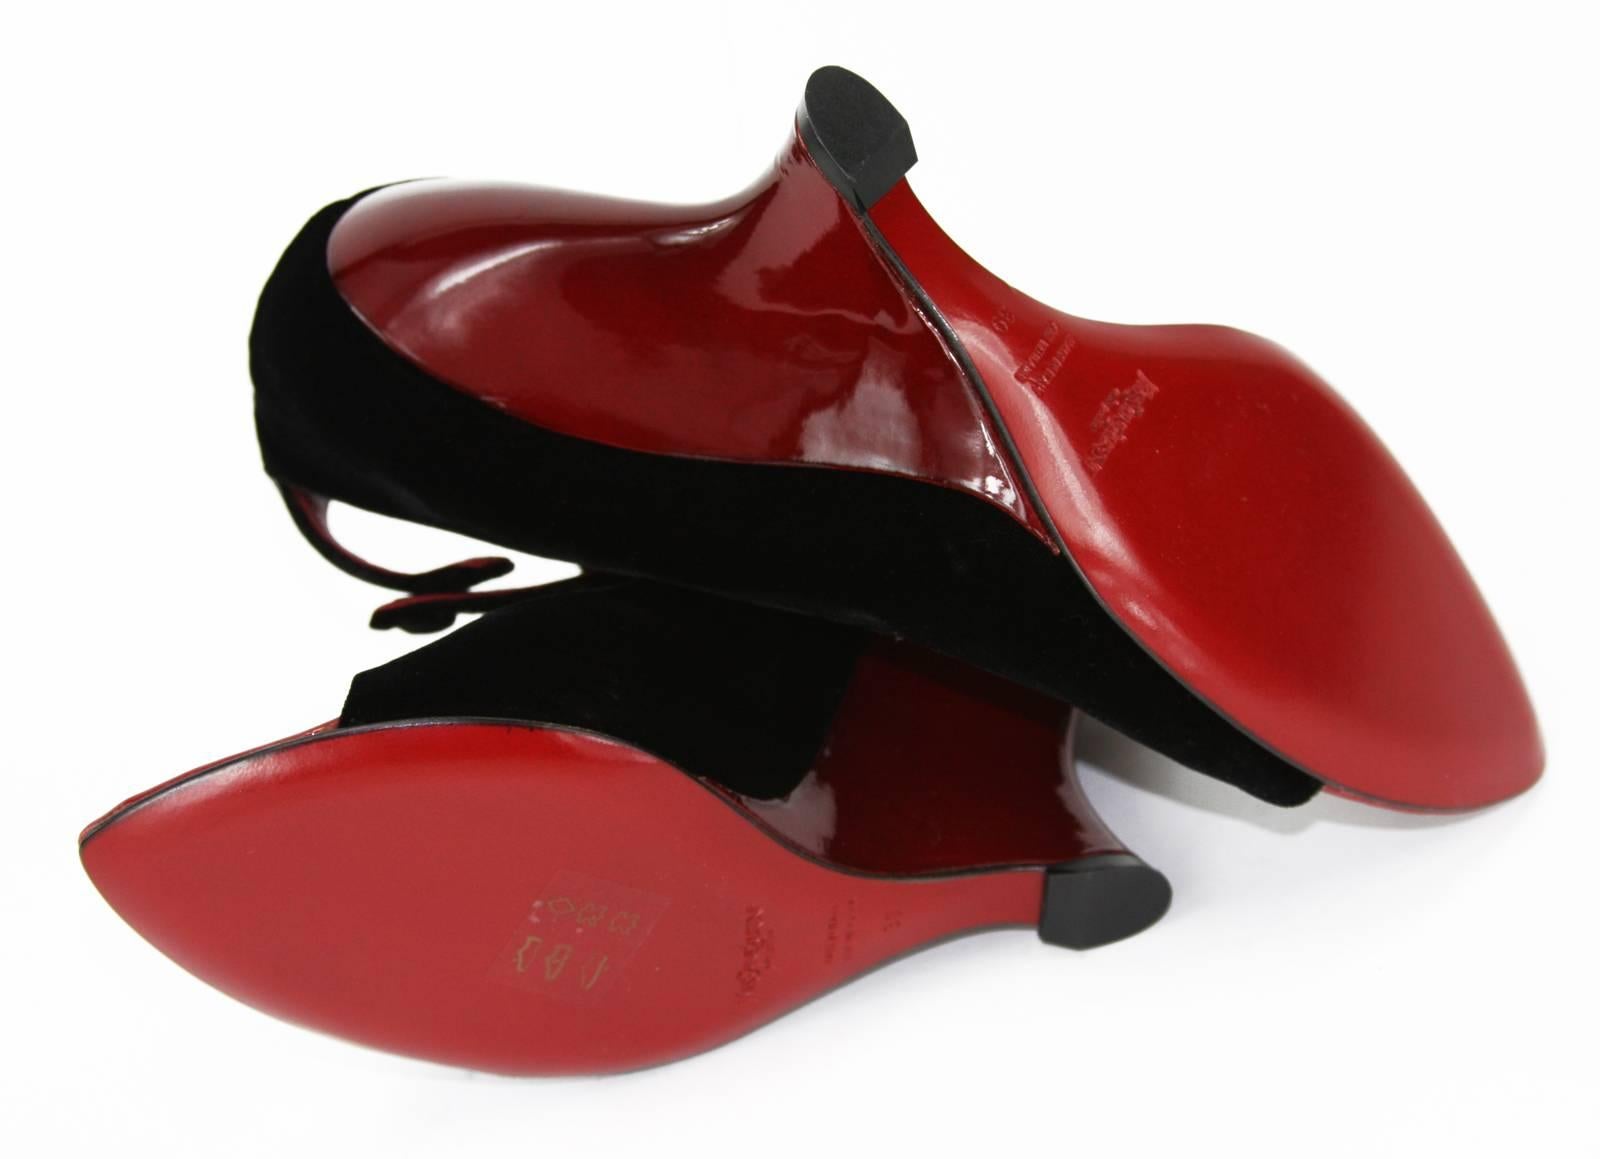 New Tom Ford for Yves Saint Laurent F/W 2004 Red Black Shoes 38.5  39  42 For Sale 1